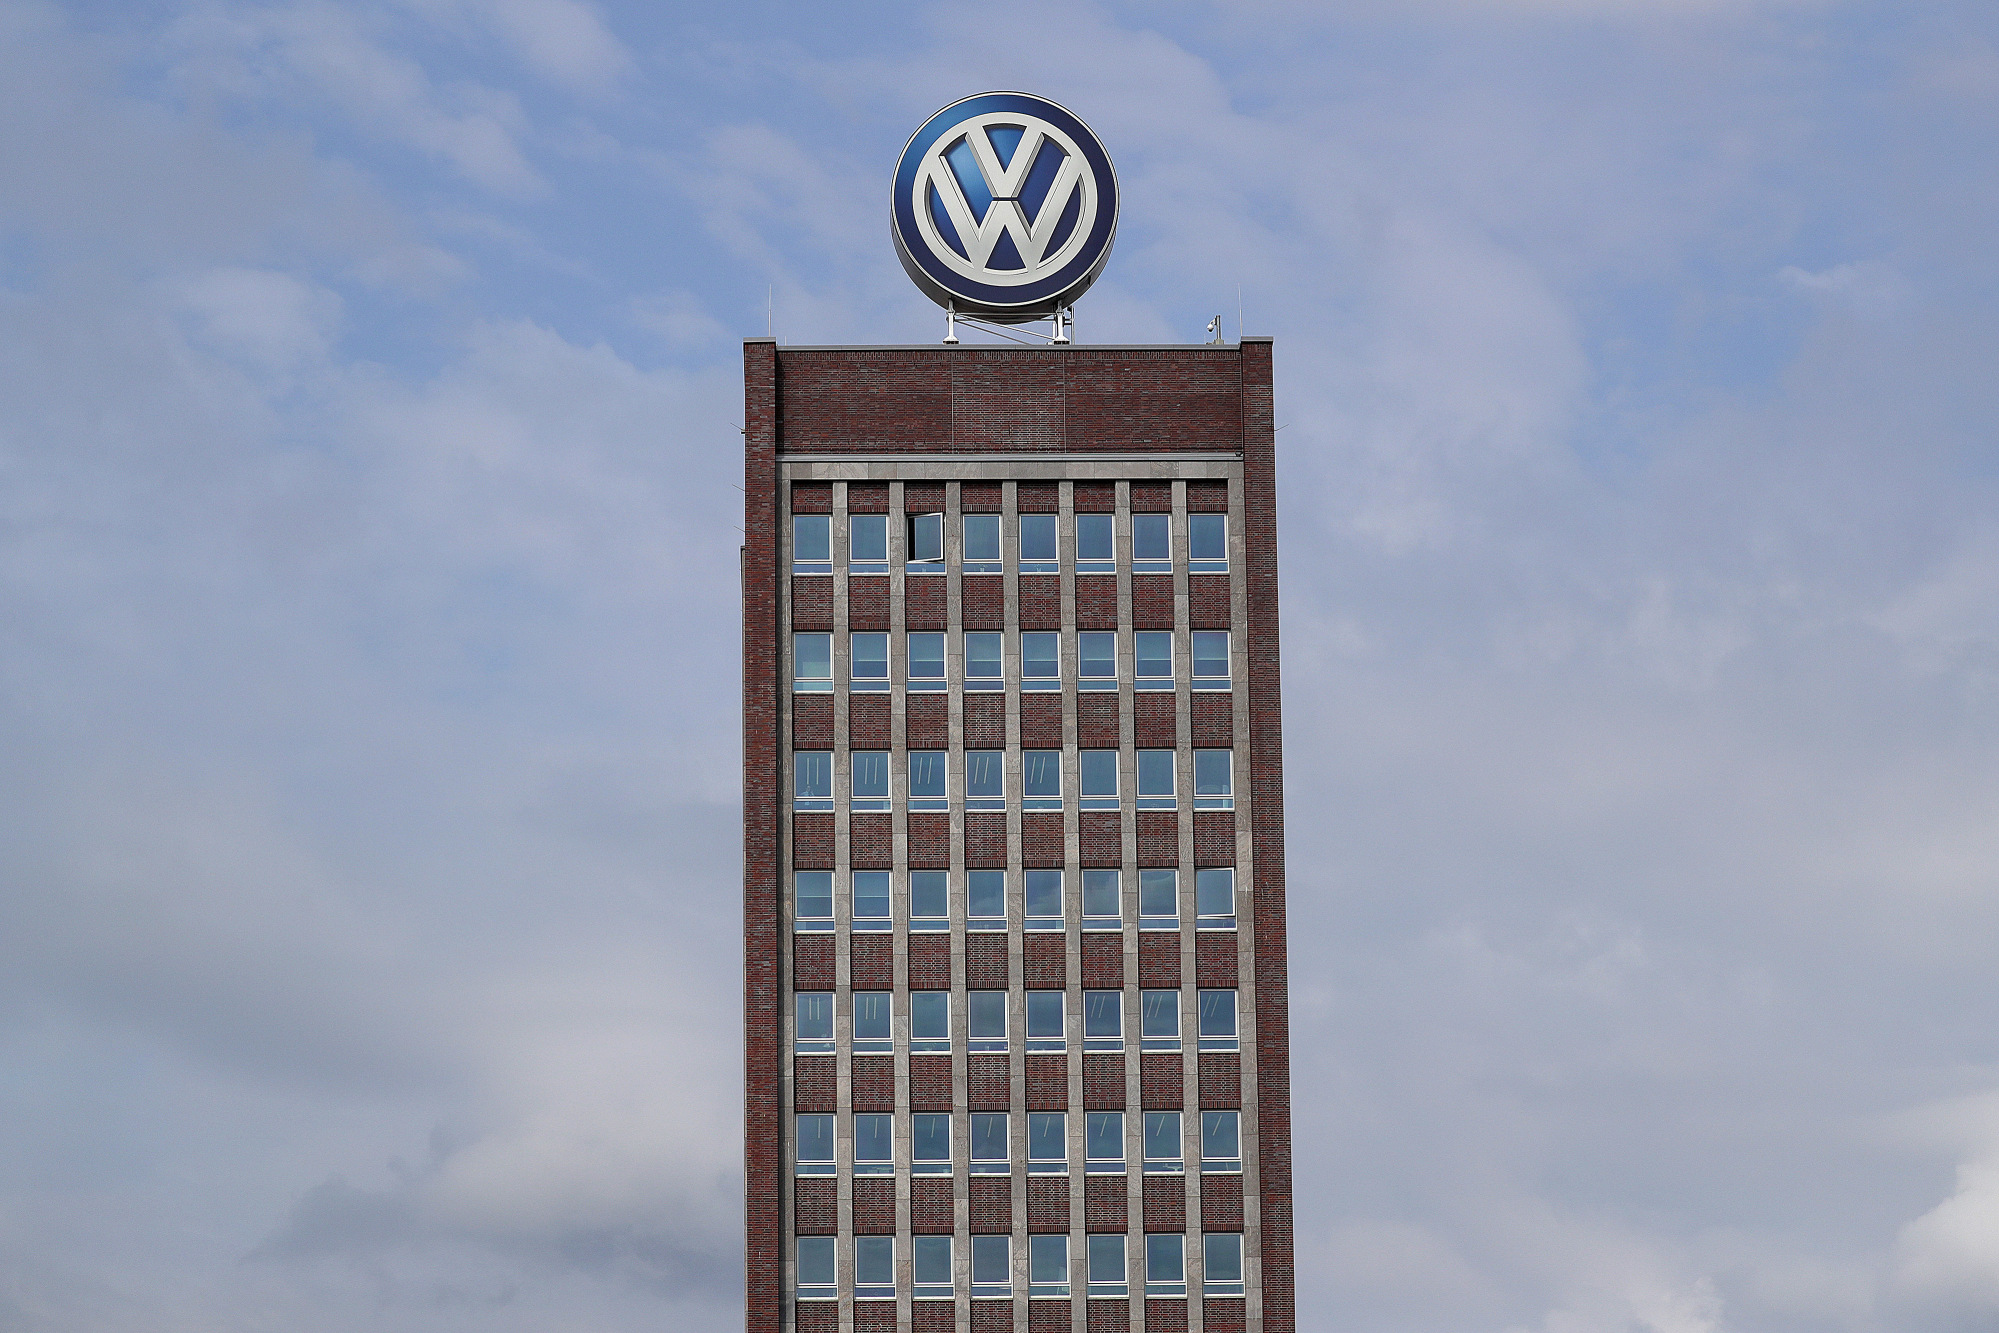 volkswagen debuts new logo aiming to clean its polluter image